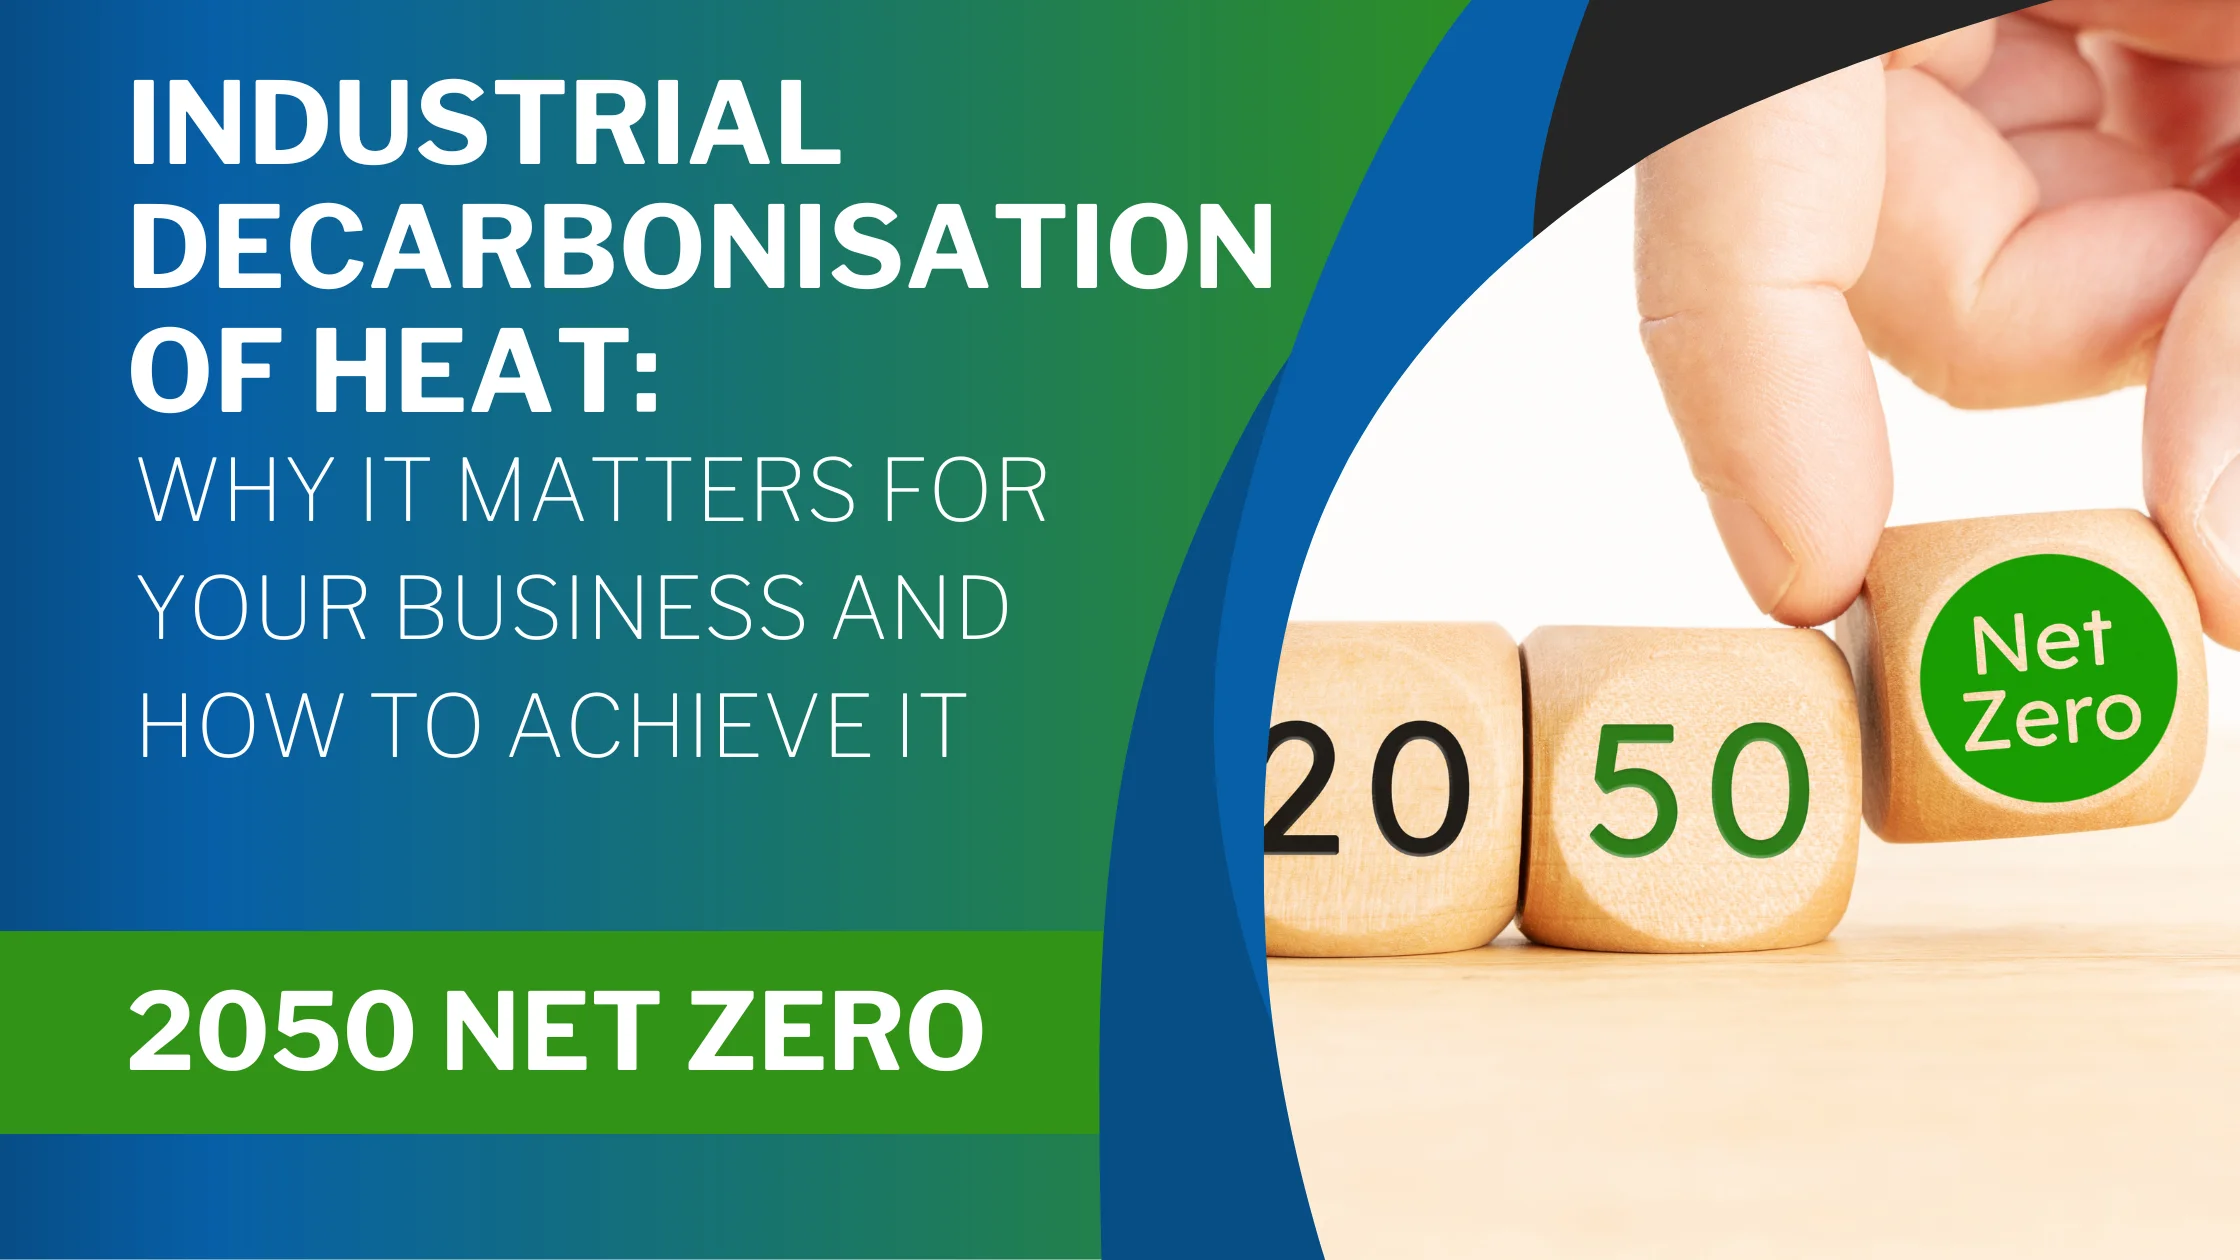 Industrial Decarbonisation of Heat: Why It Matters for Your Business and How to Achieve It